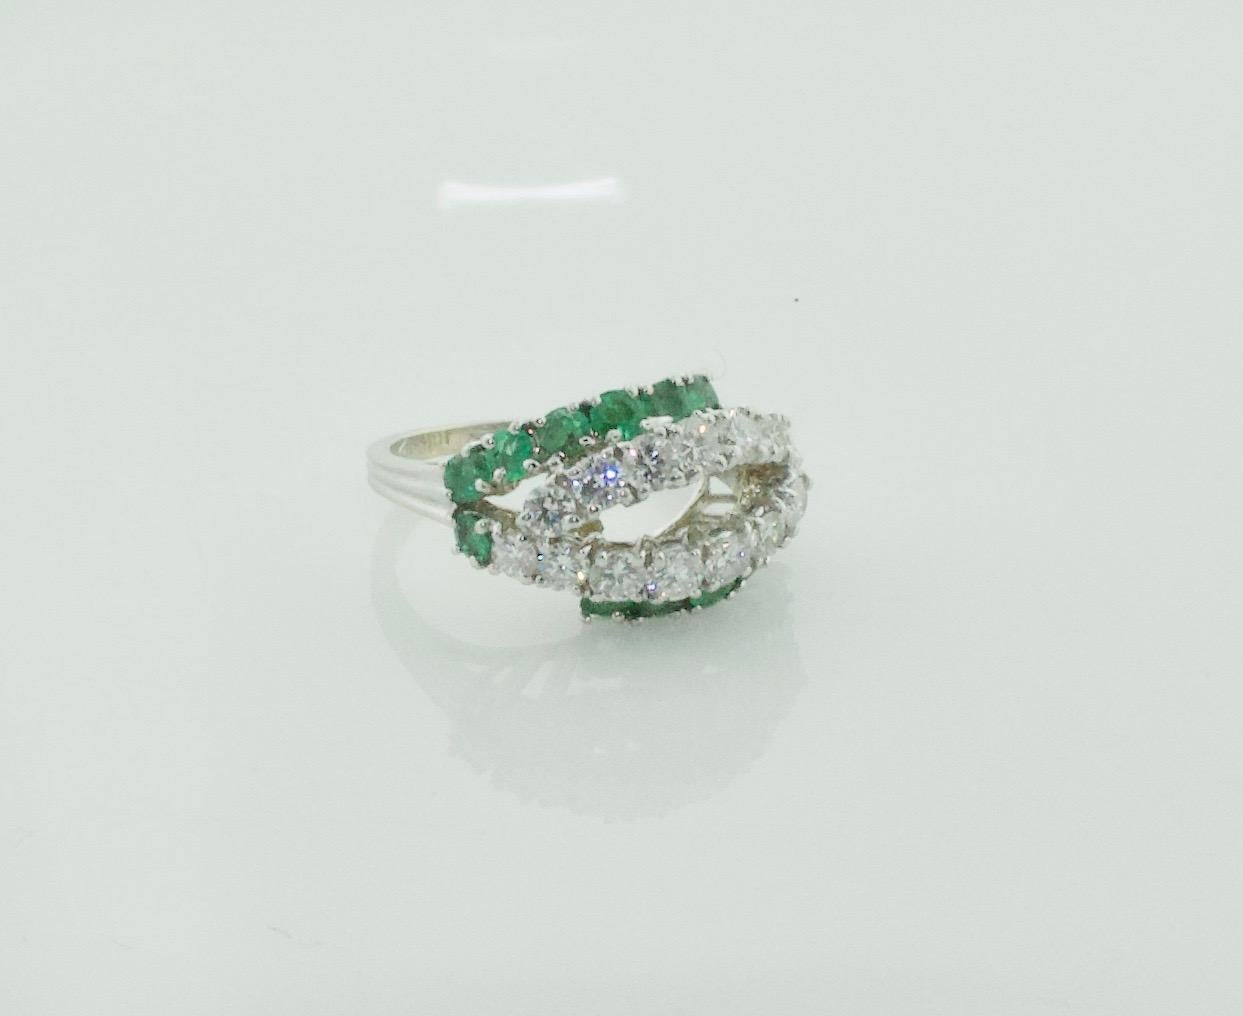 Estate Vintage Emerald and Diamond Ring in 18k White Gold
Introducing our Estate Vintage Emerald and Diamond Ring in 18k White Gold - a true masterpiece of fine jewelry. This exquisite ring features a stunning combination of emeralds and diamonds,